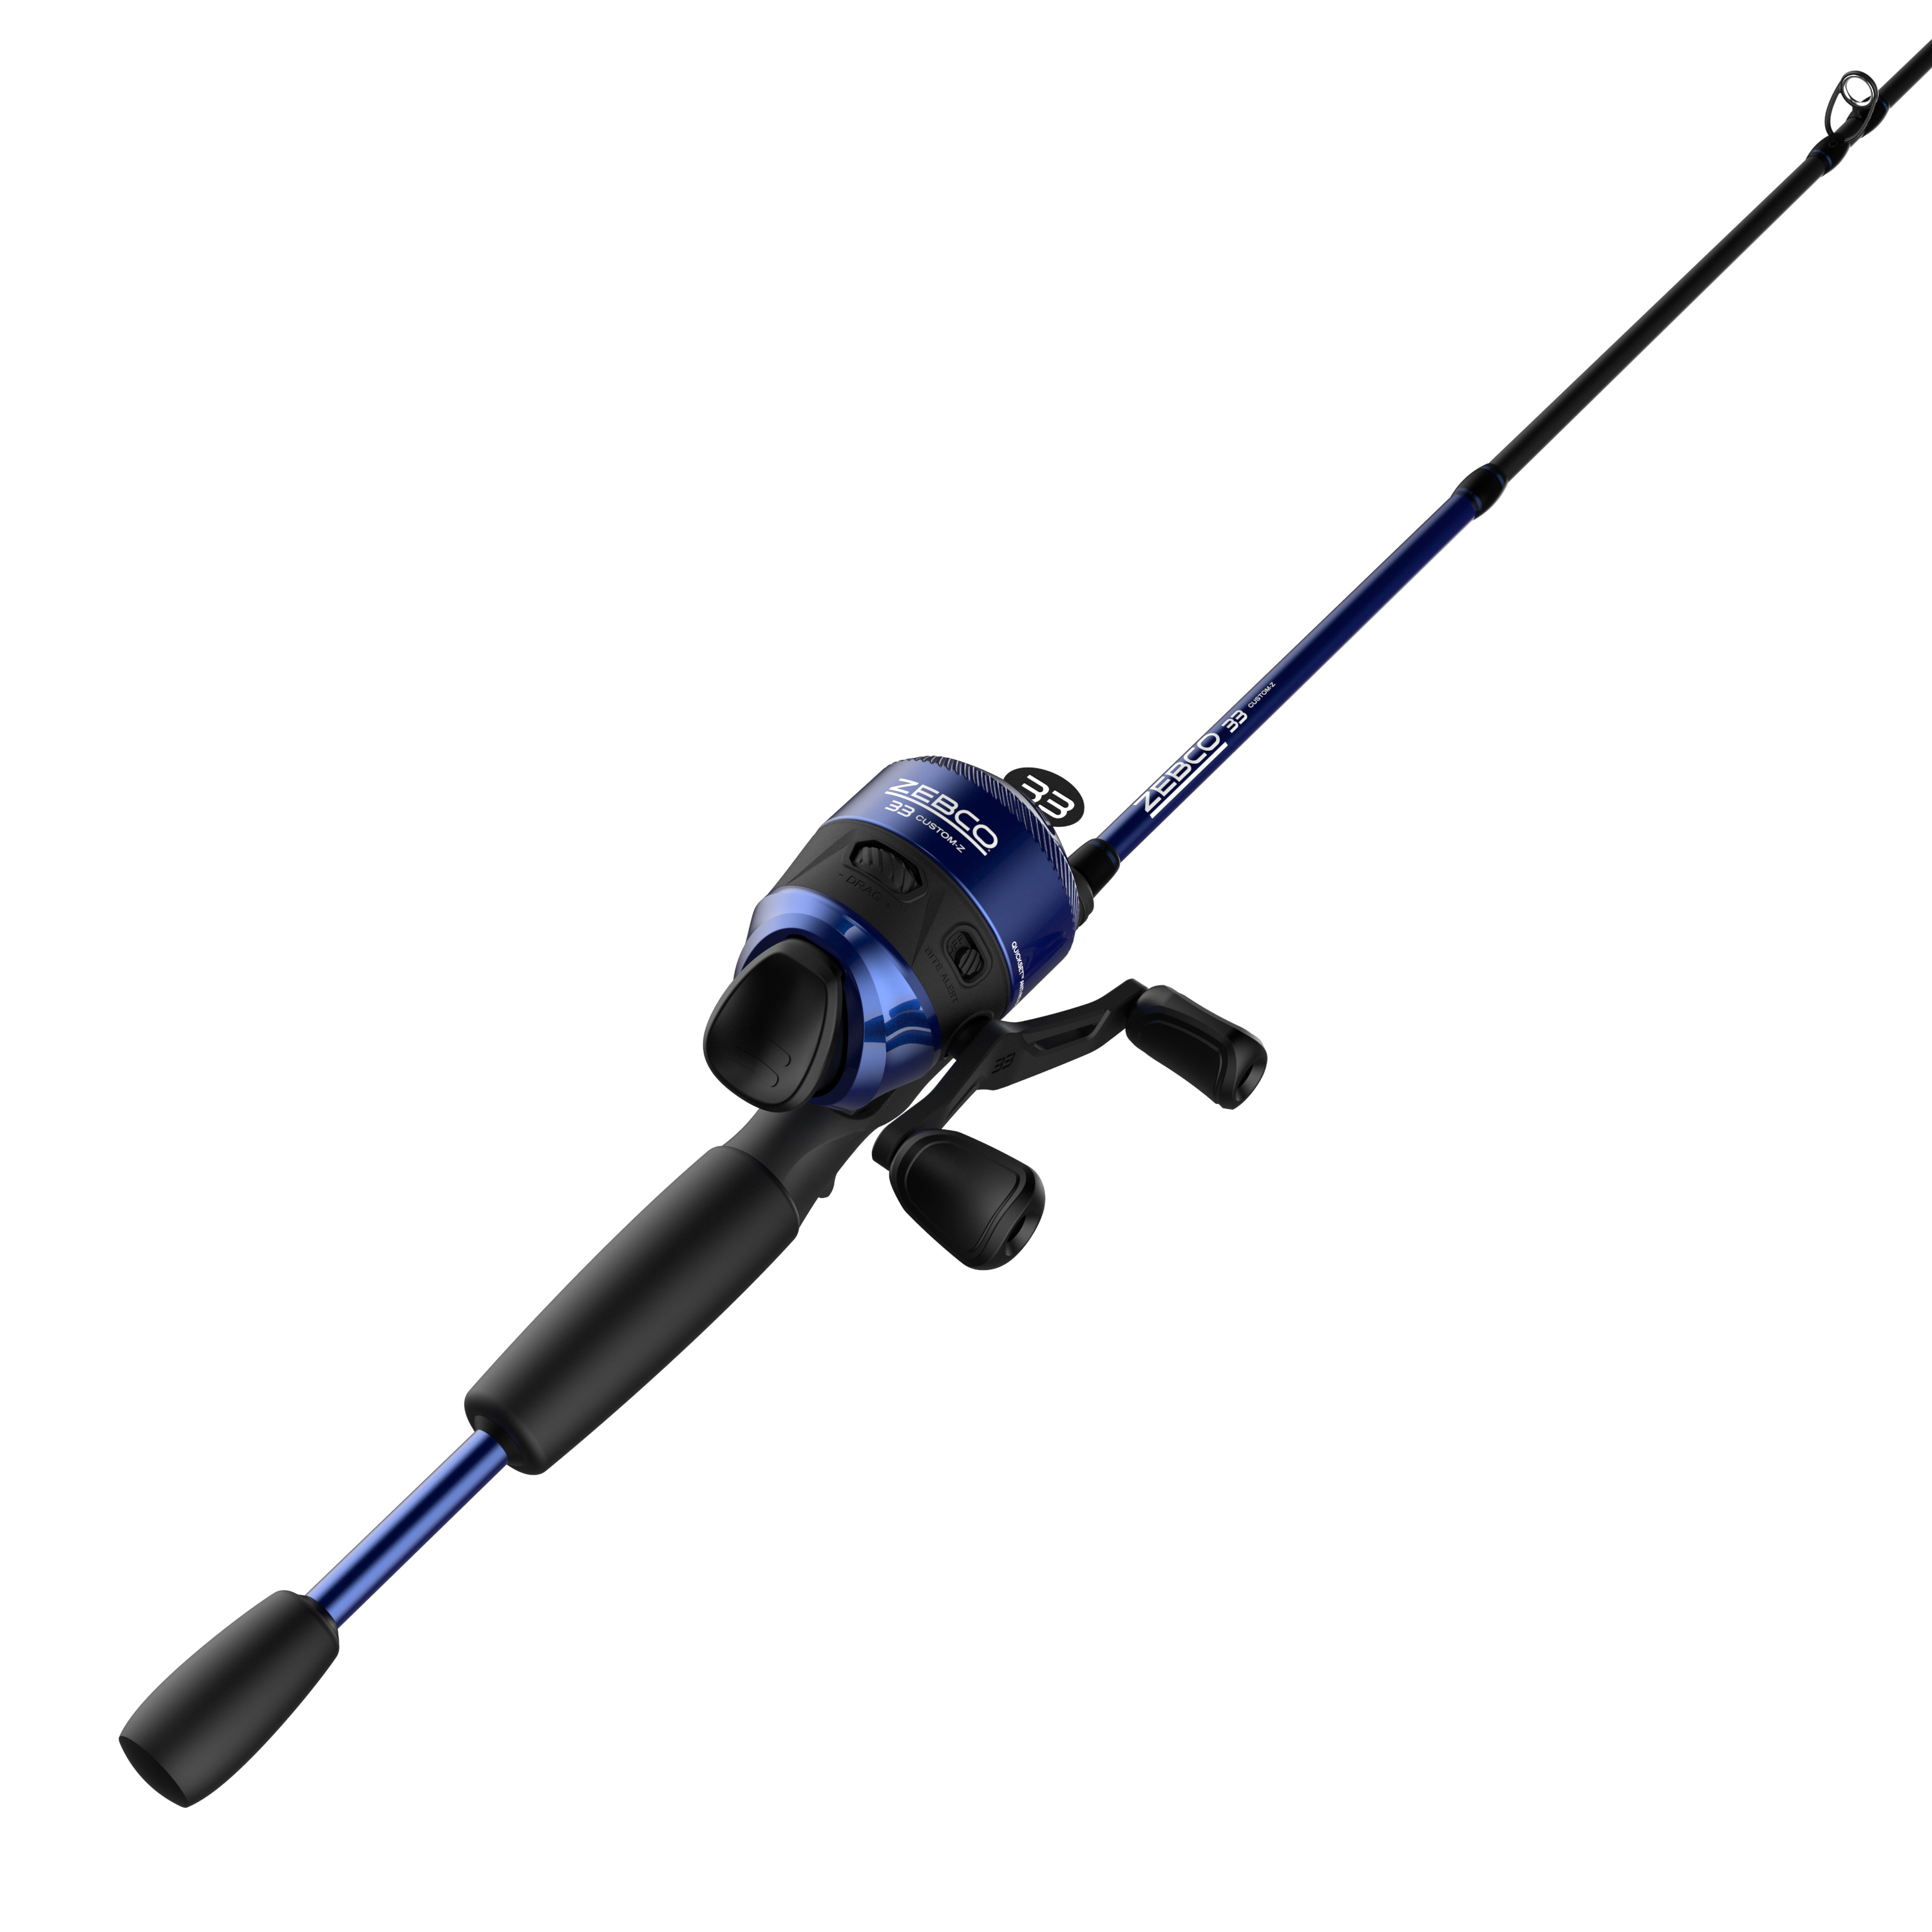 Zebco Slingshot Spin Fishing Combo, Medium, 2-Piece - 5 Ft 6 Inches Length